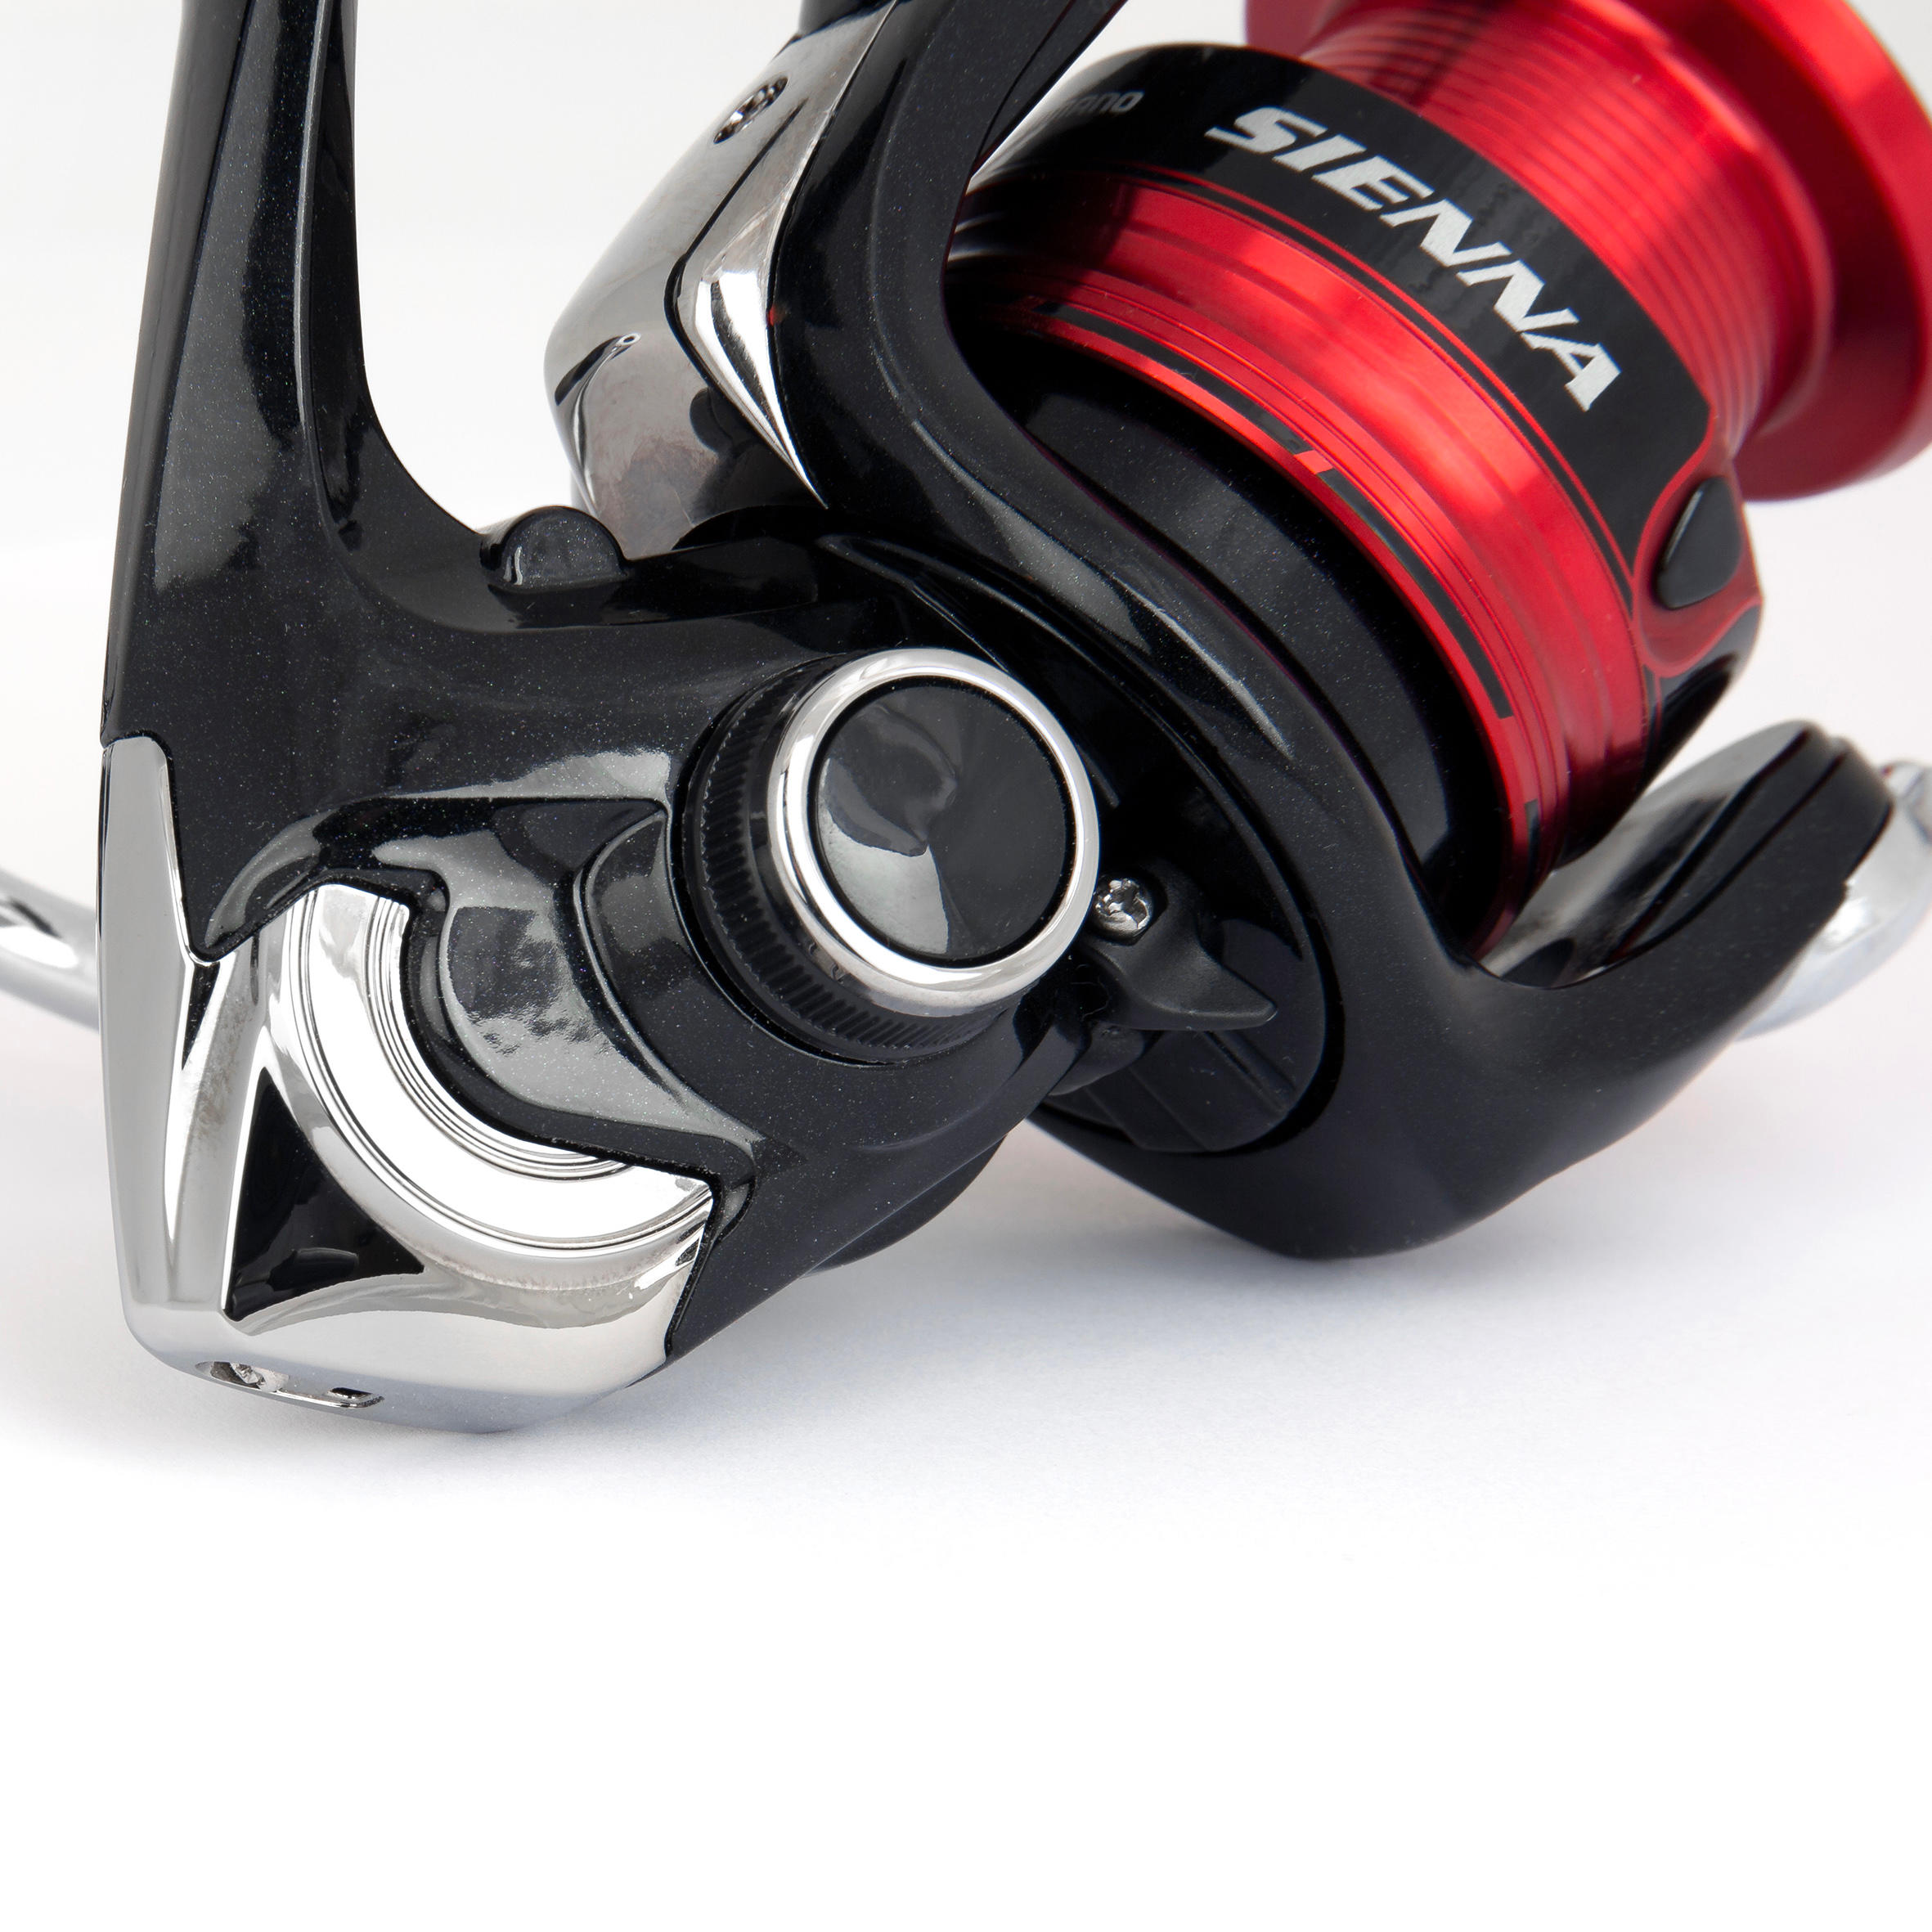 NEW SHIMANO Sienna Spinning Reel SN1000FEC for rod Fishing 1000 clam packed